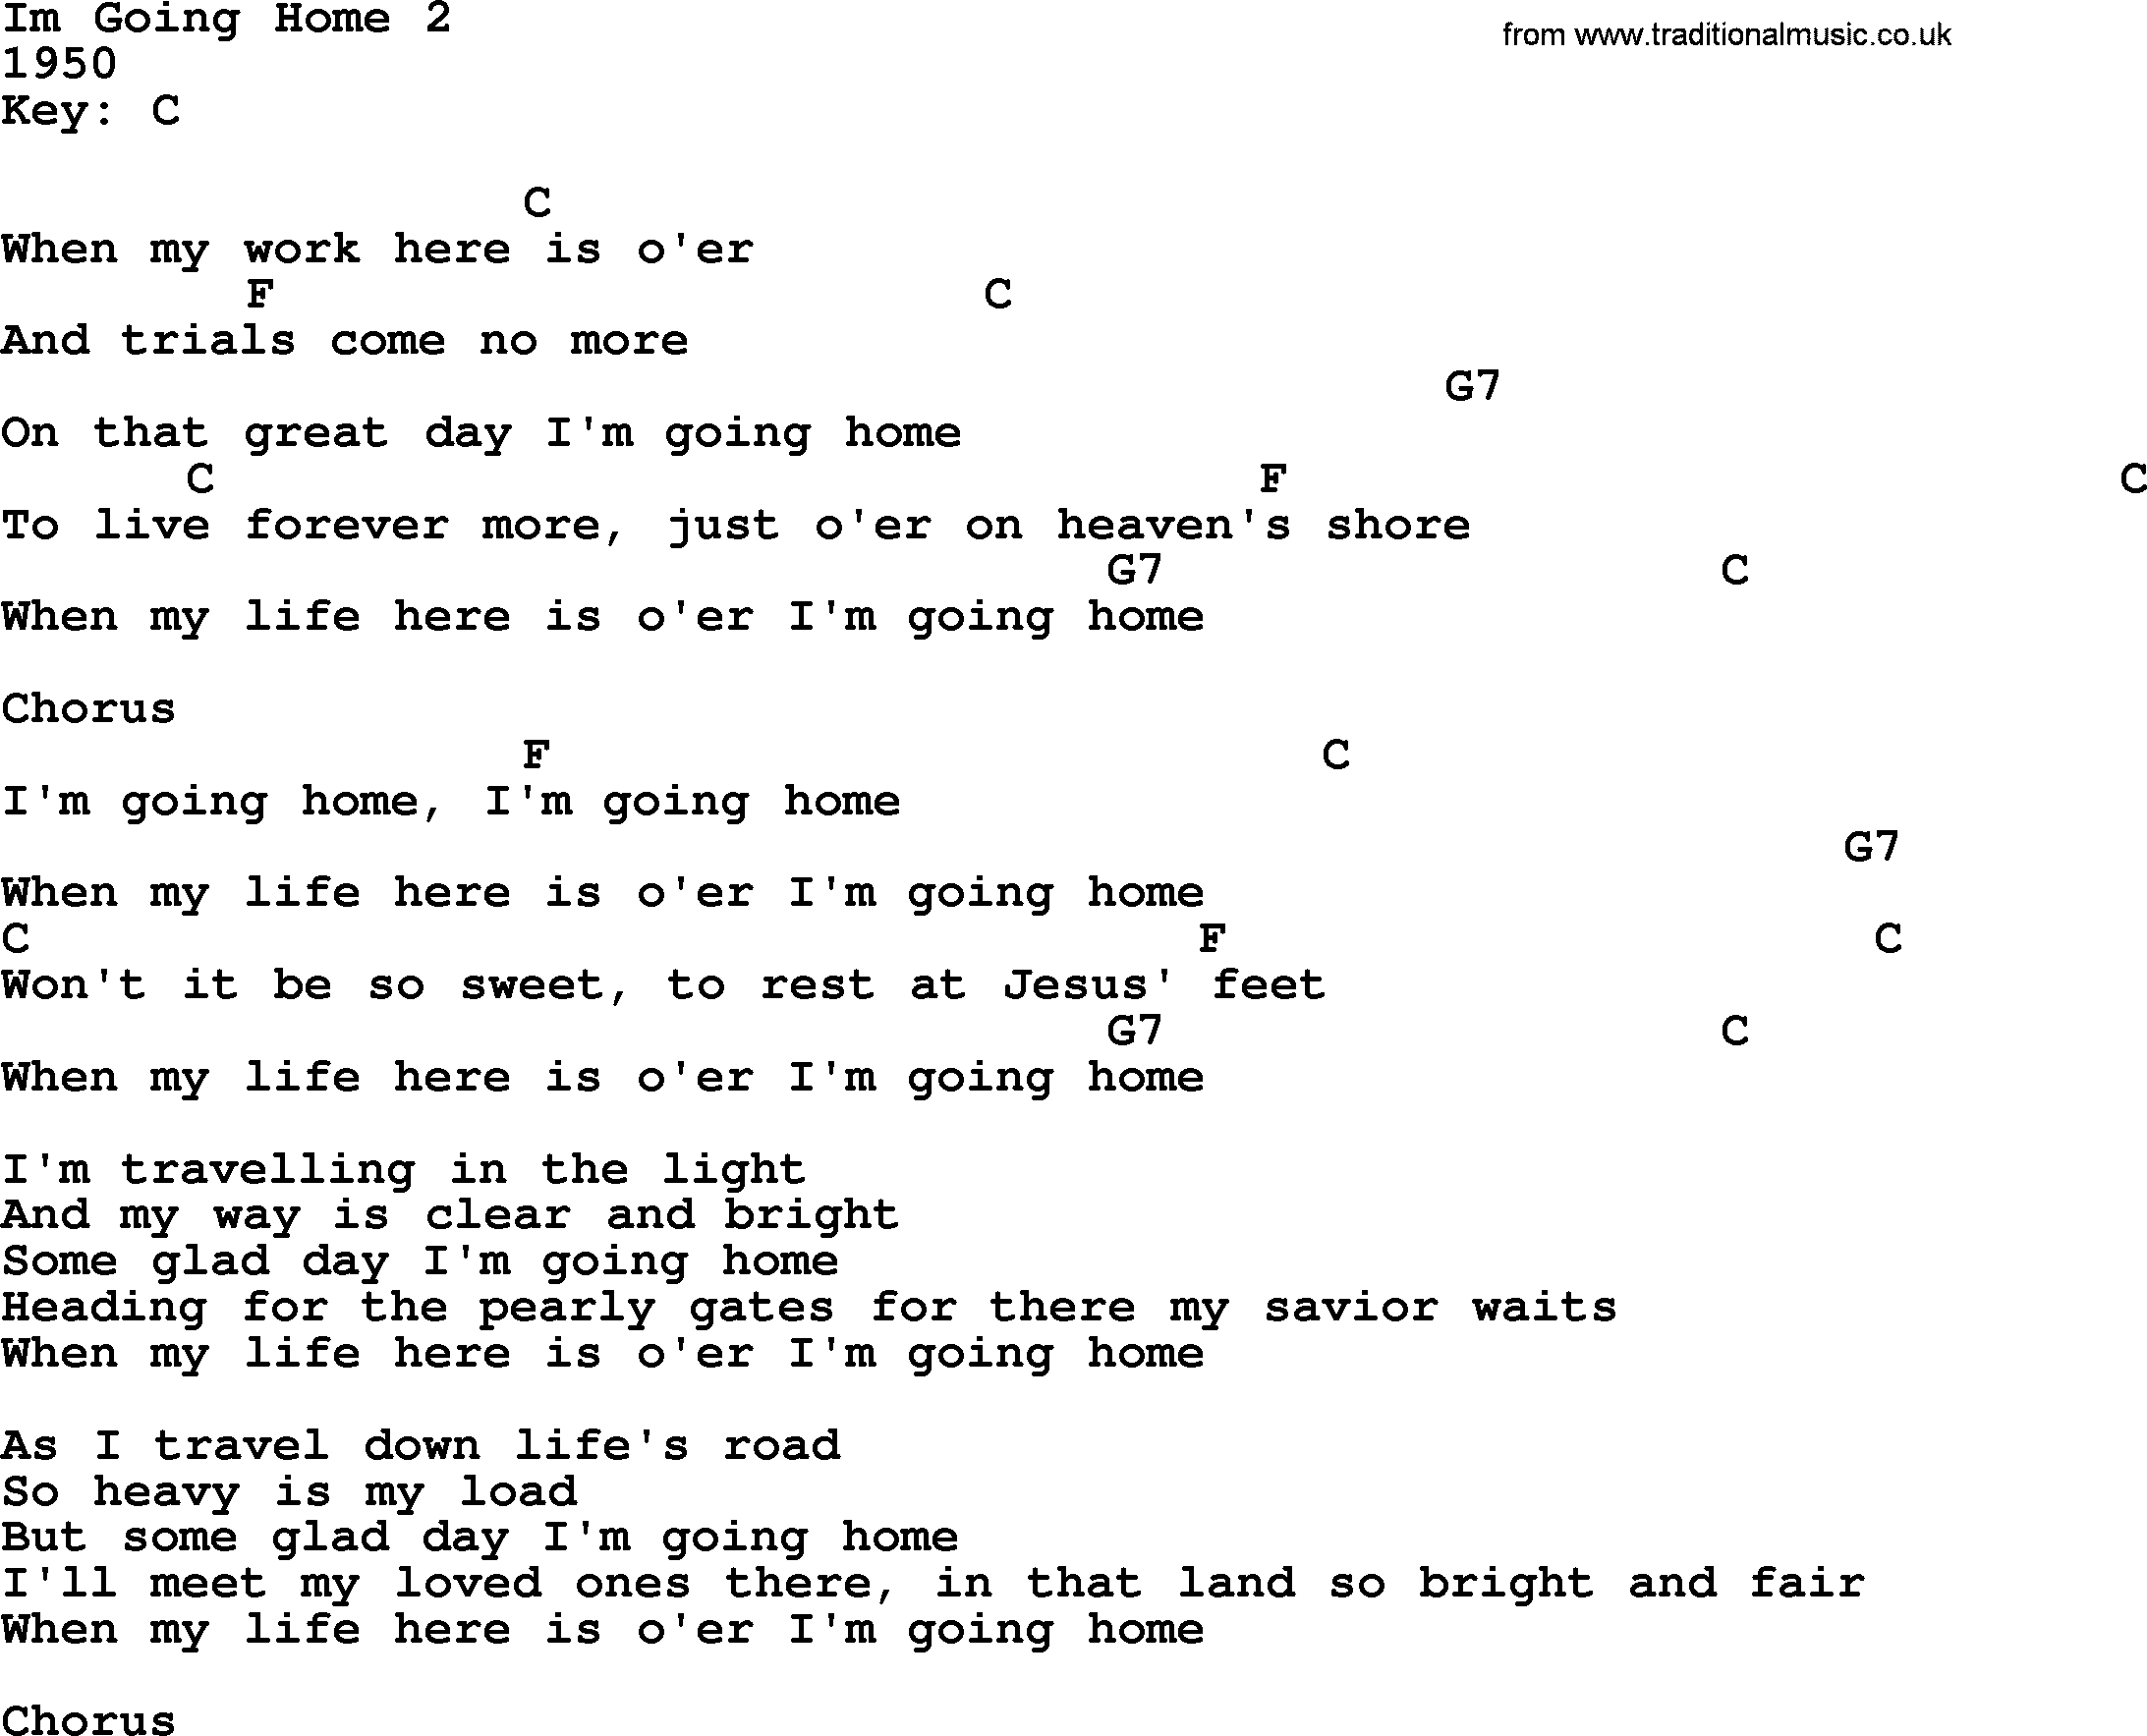 Hank Williams song Im Going Home, lyrics and chords